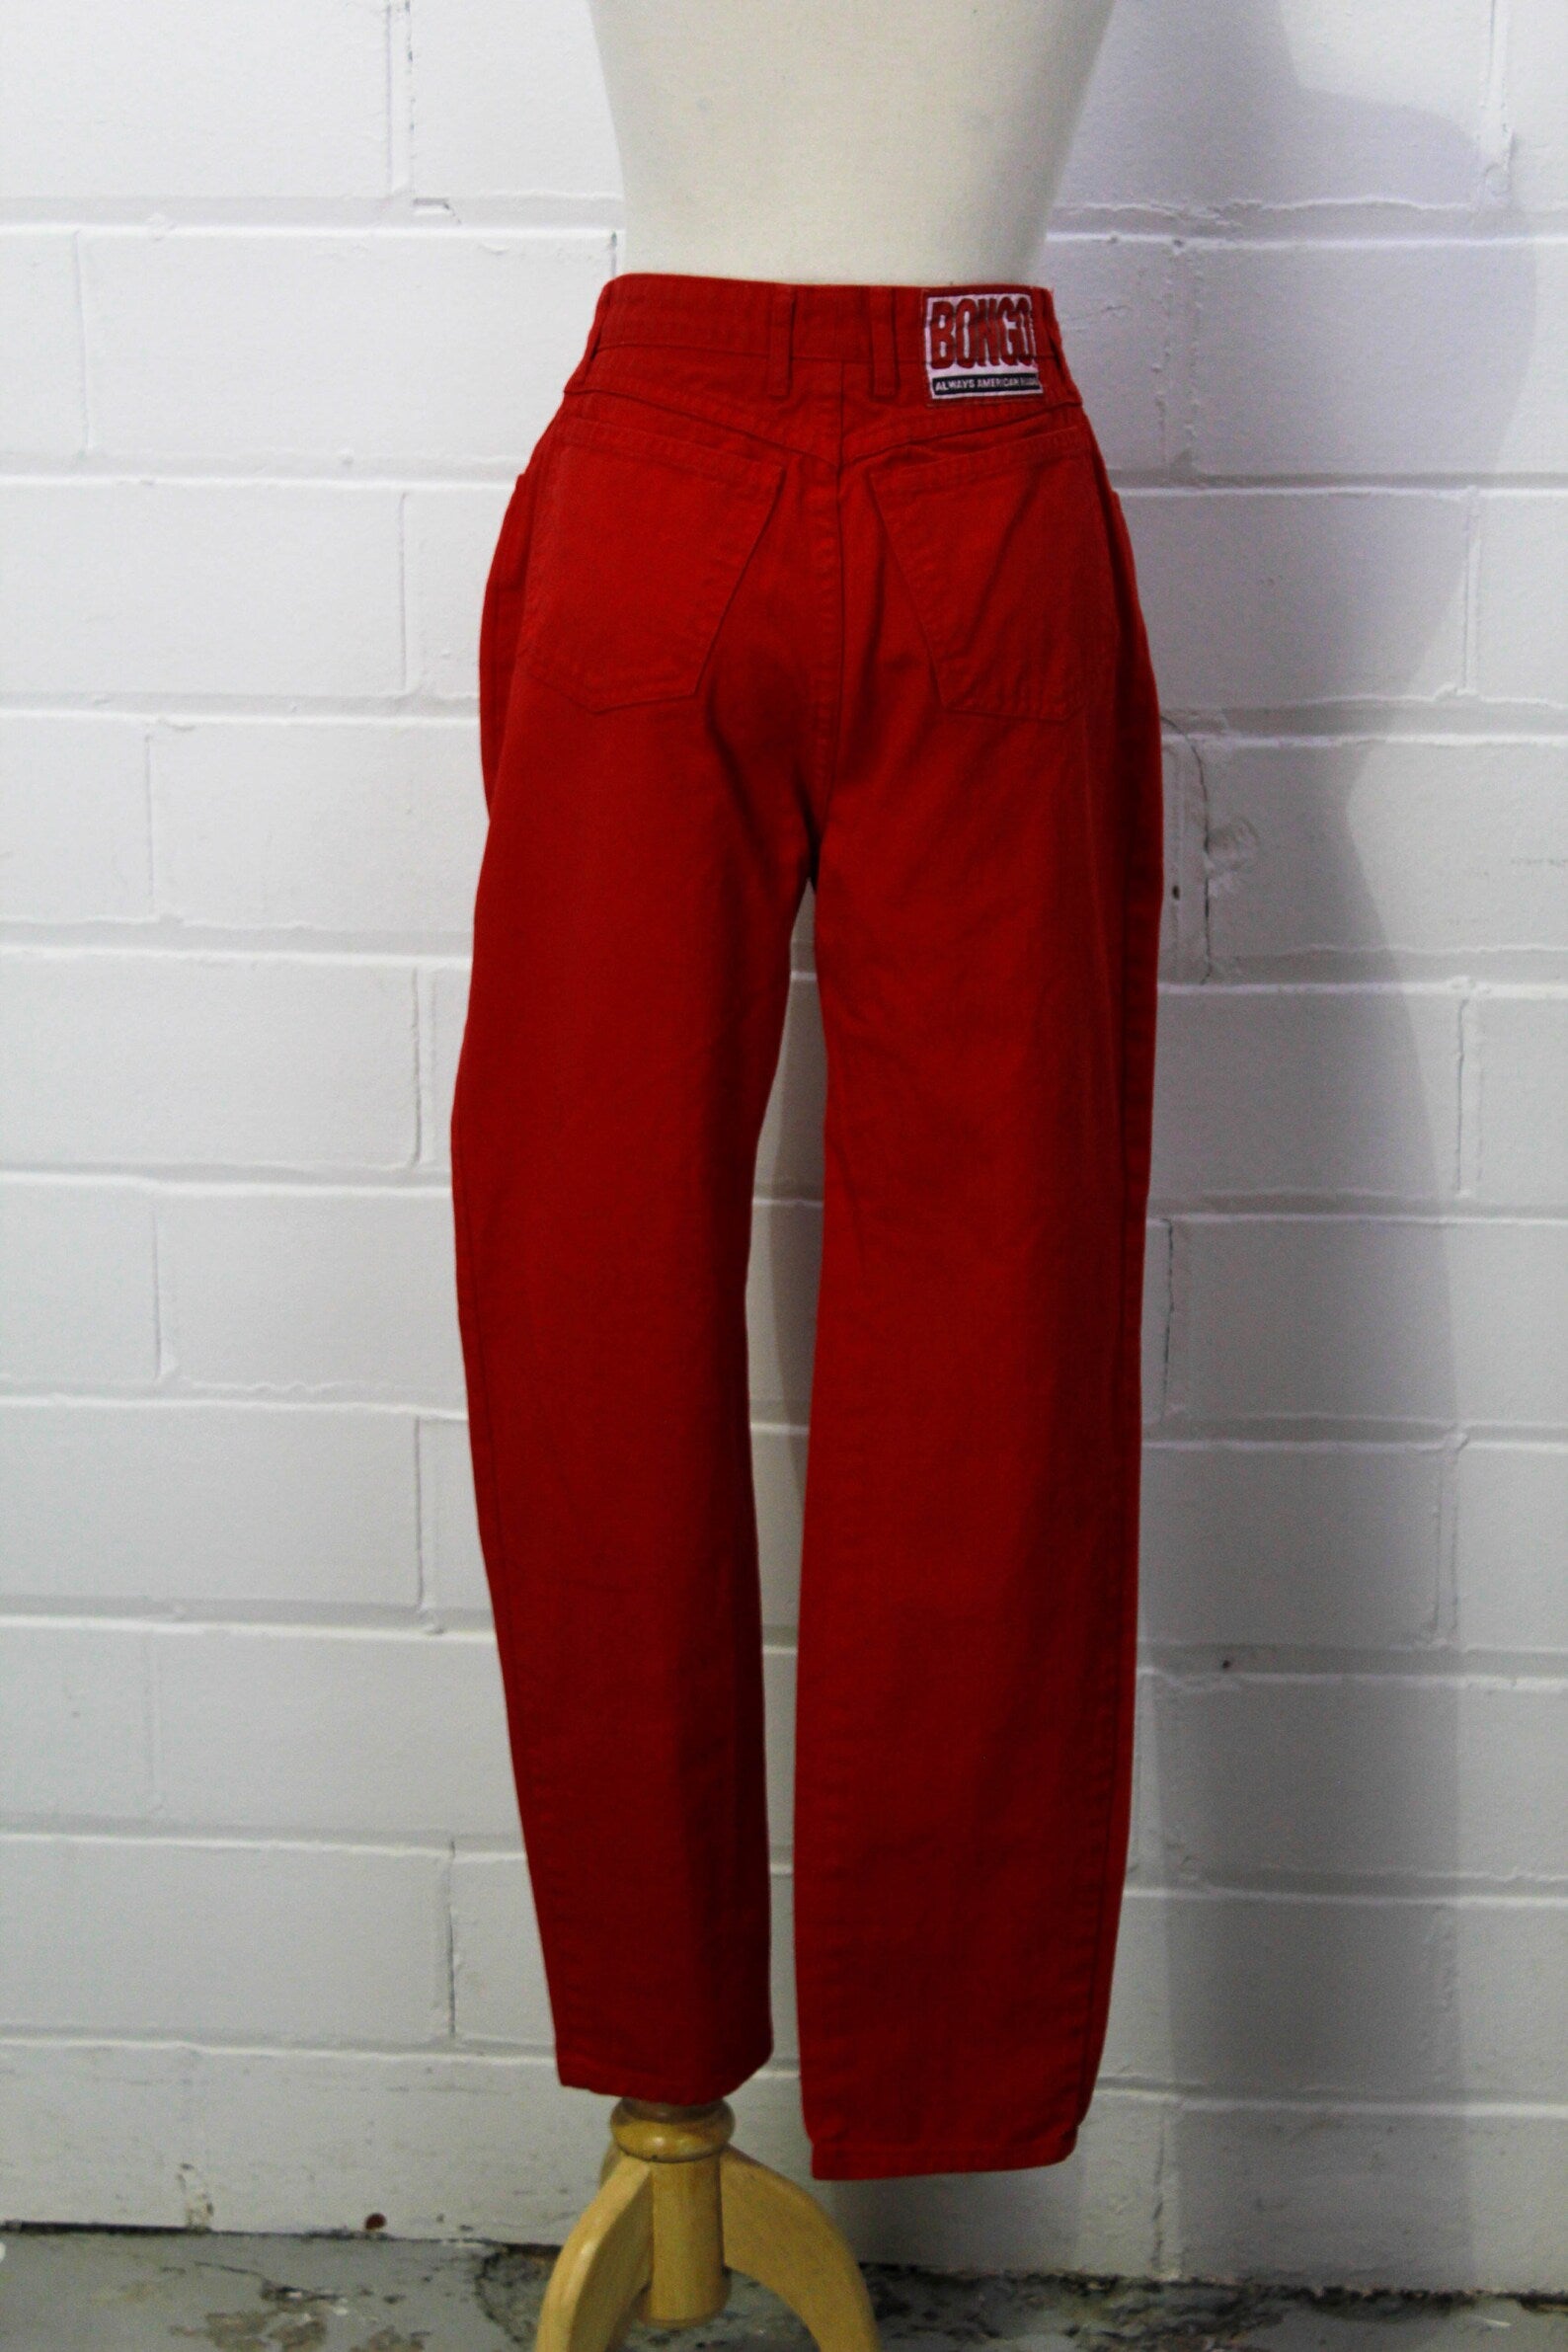 Perfect 80s red cotton high waisted denim jeans by Bongo. They have a 5 pocket design, and the Bongo logo on the back waist that reads "Always American Made". 